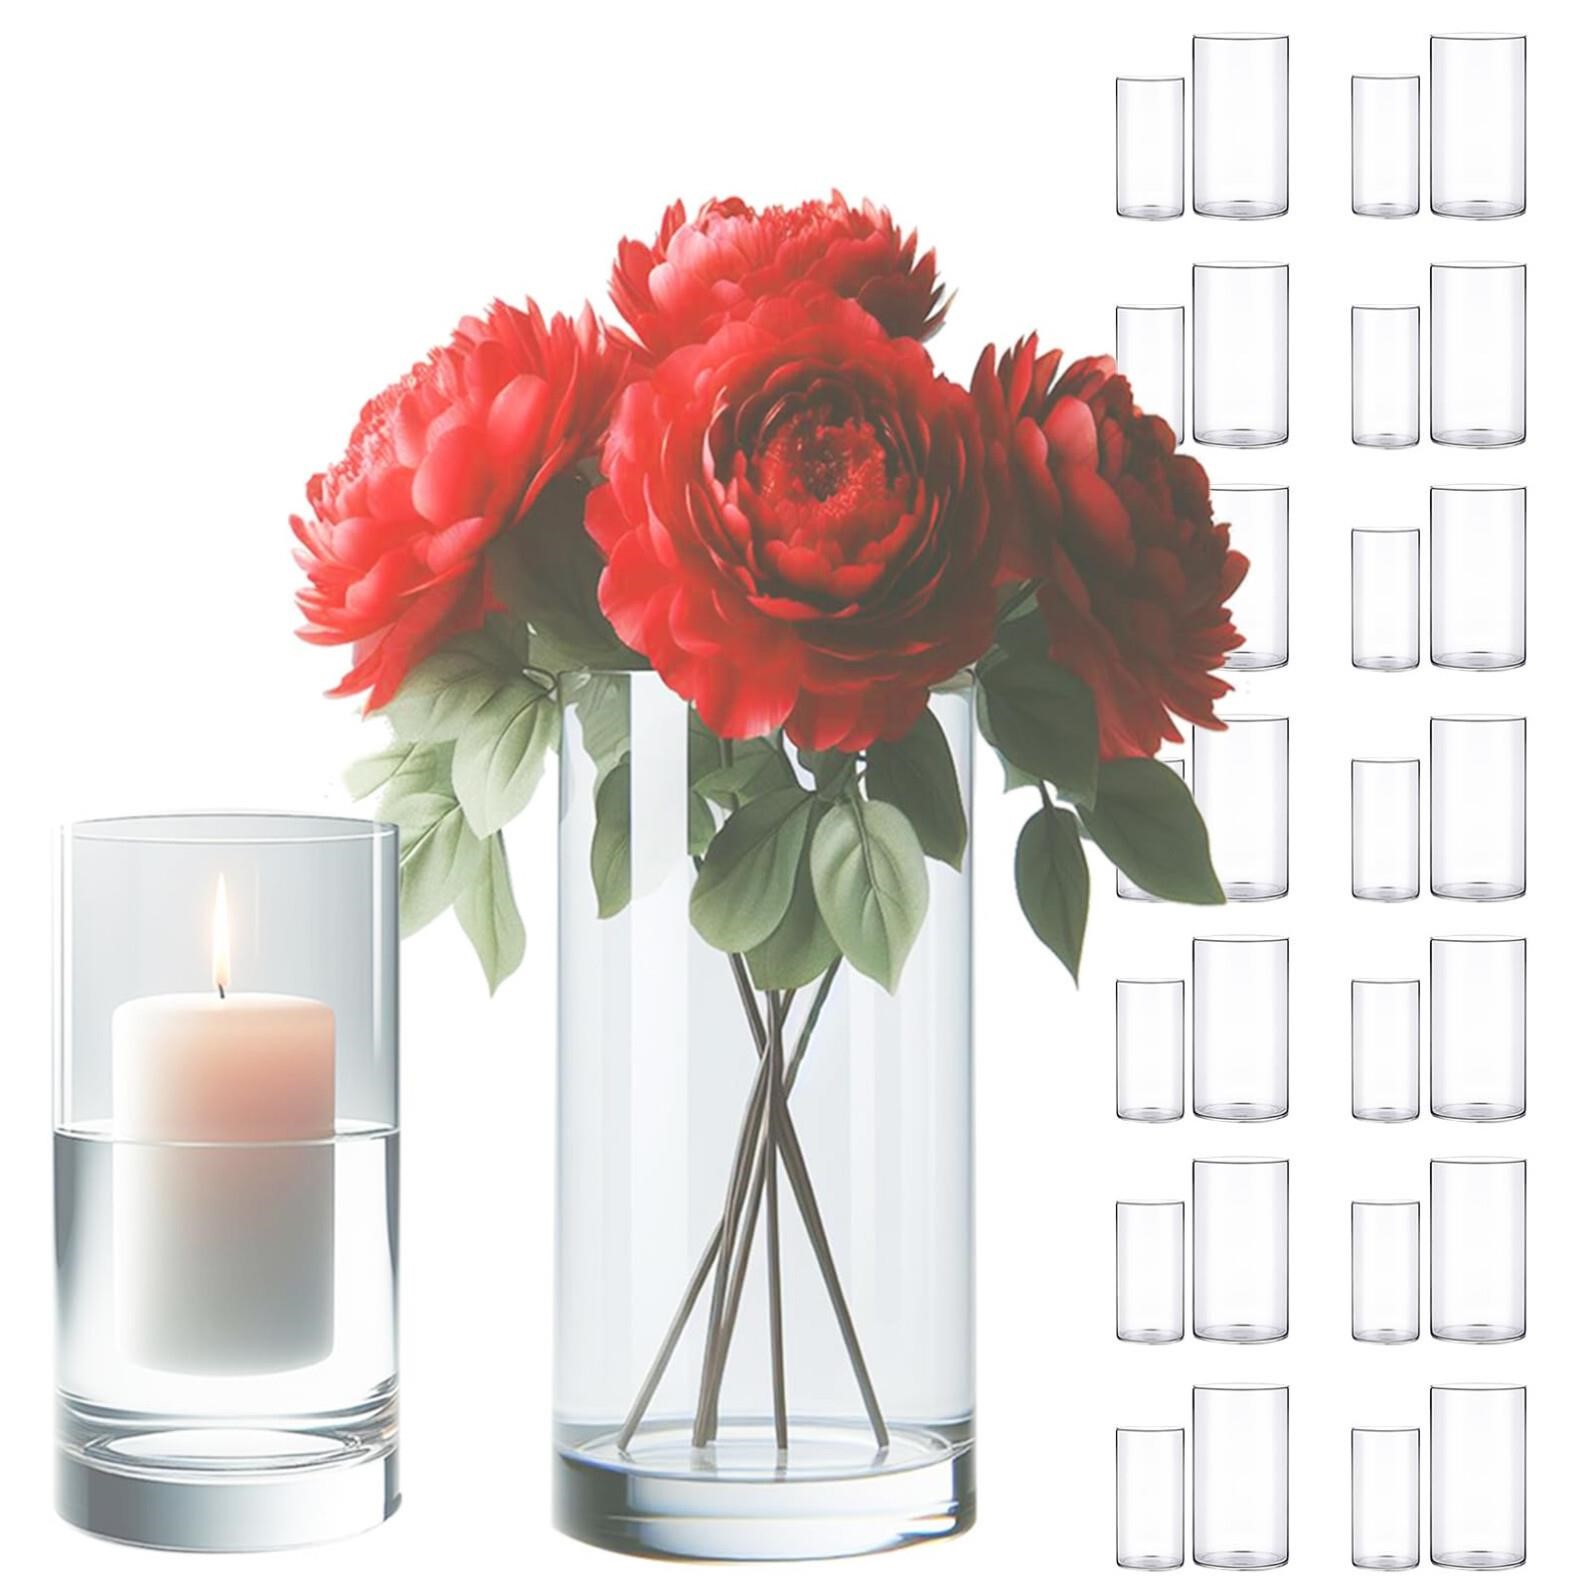 Doubay 24 Pack Cylinder Glass Vases for Centerpie